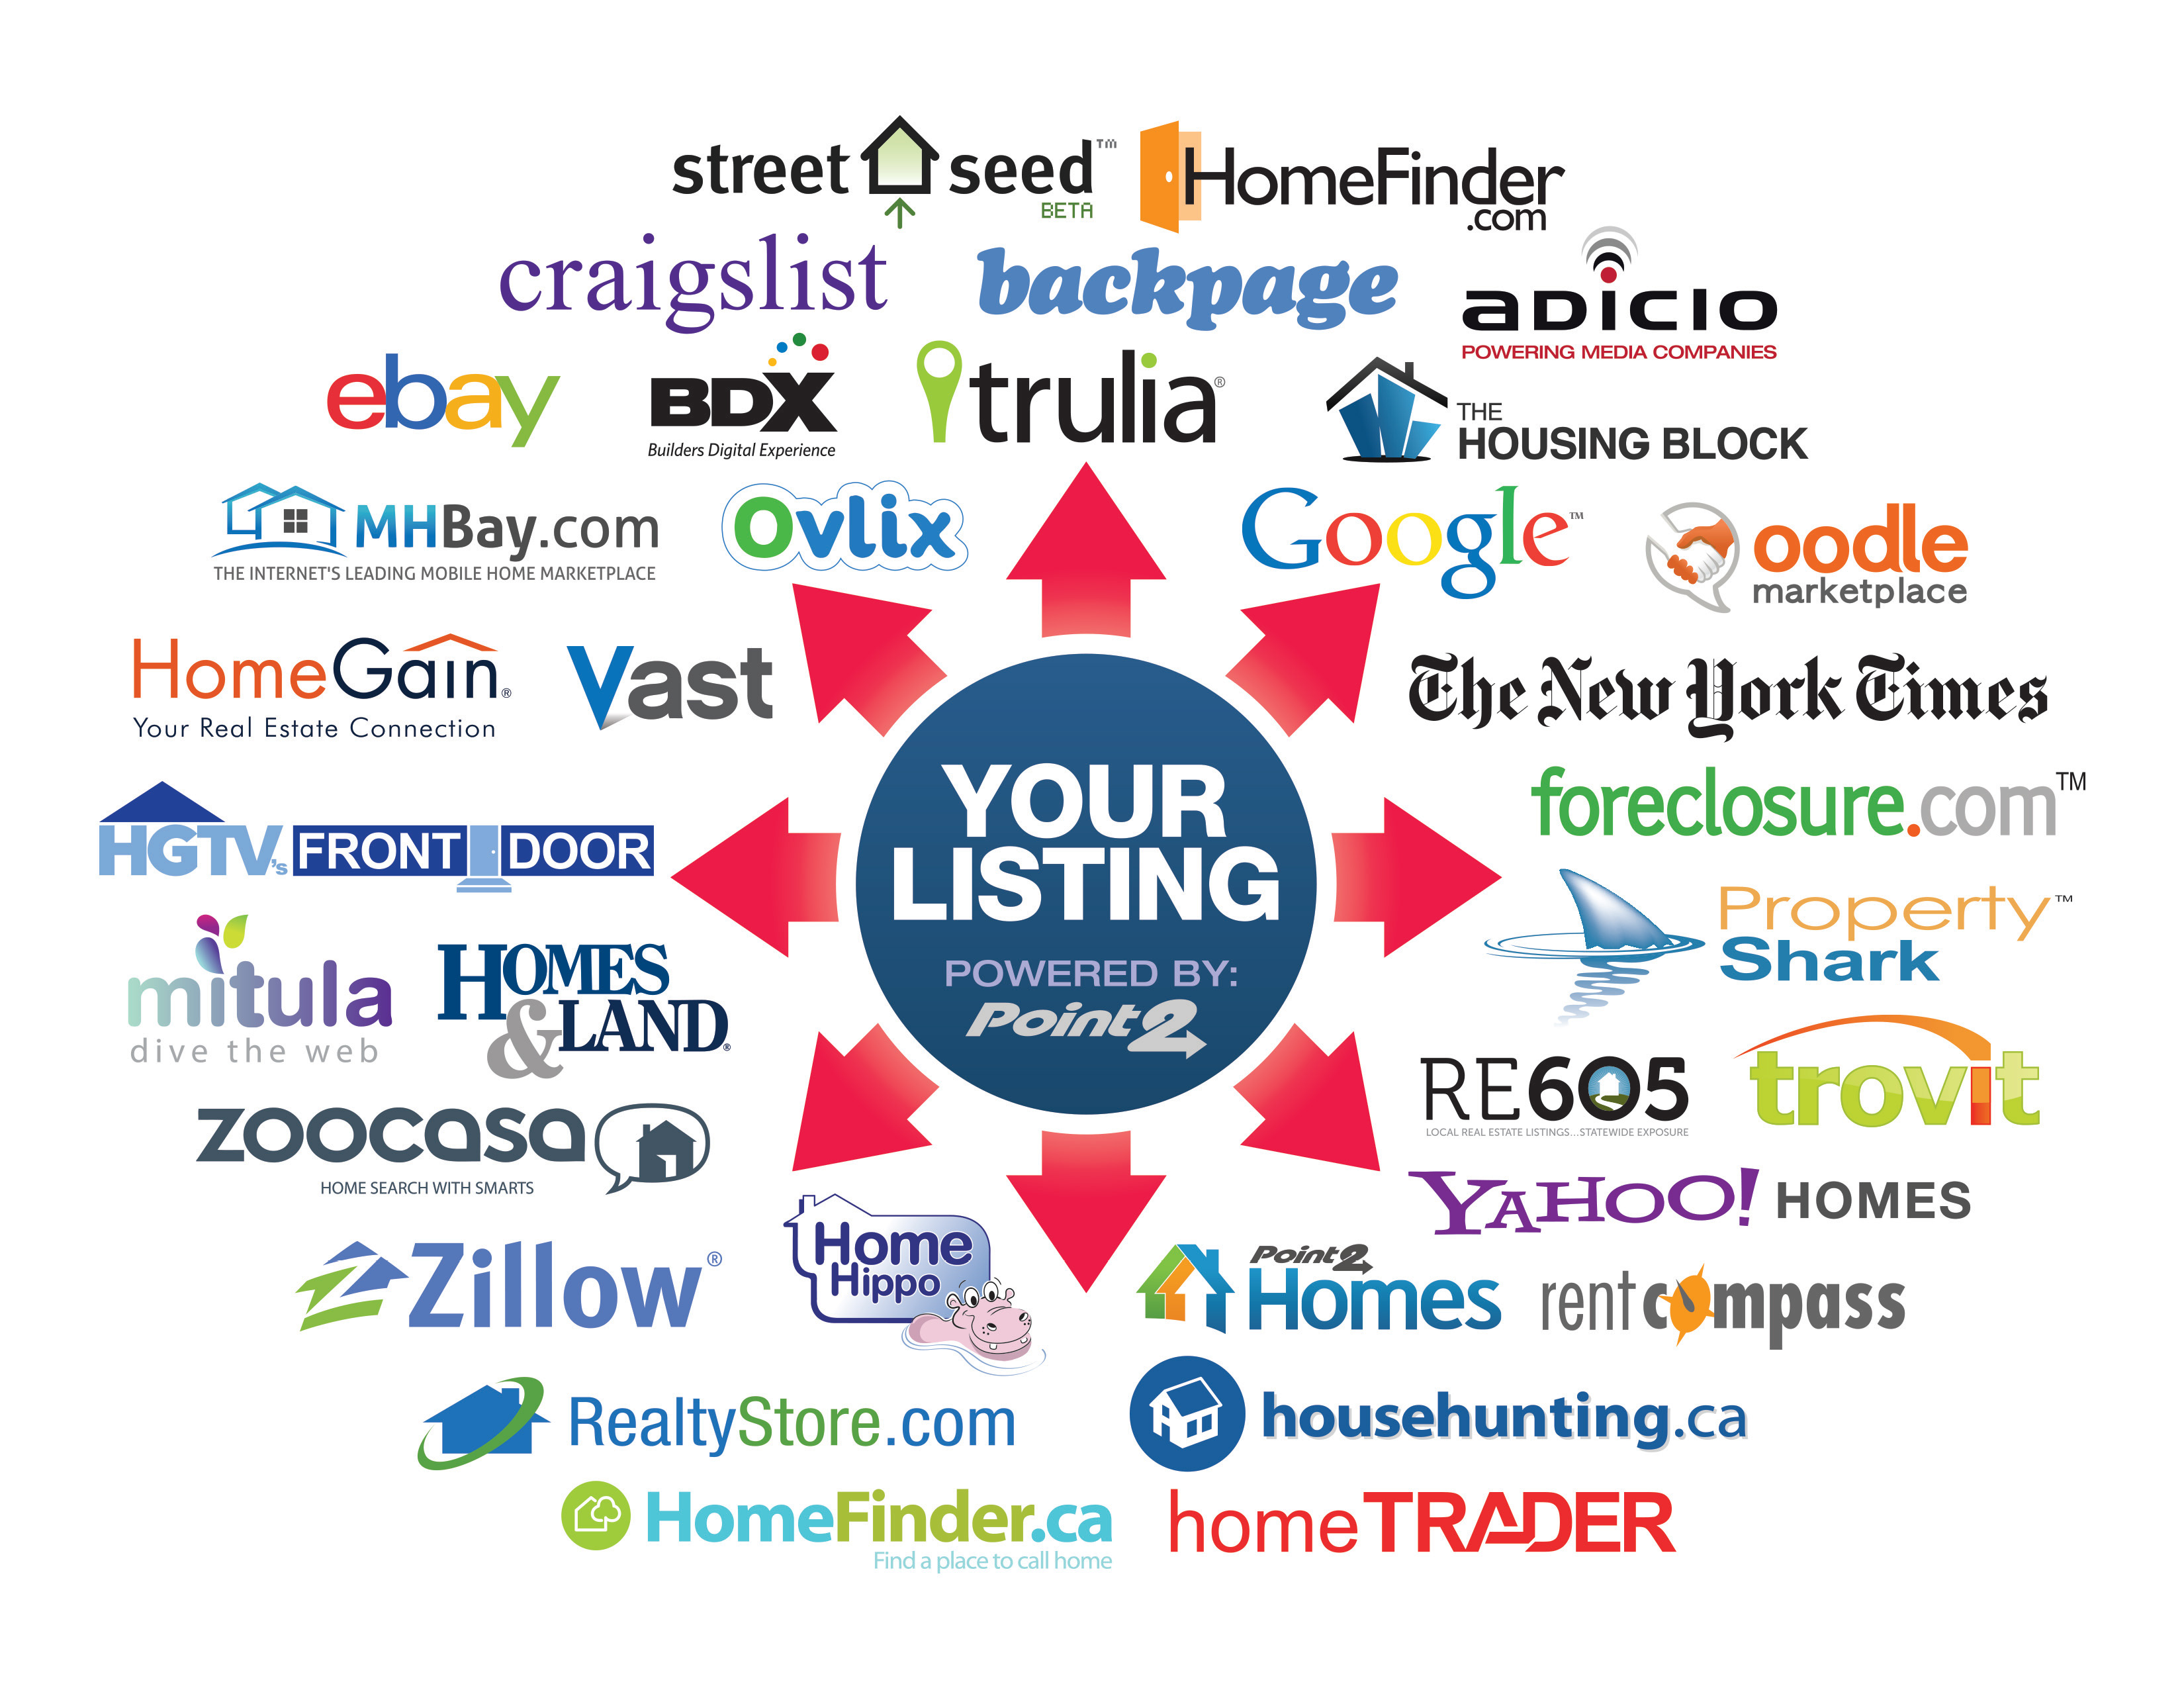 Your Listing